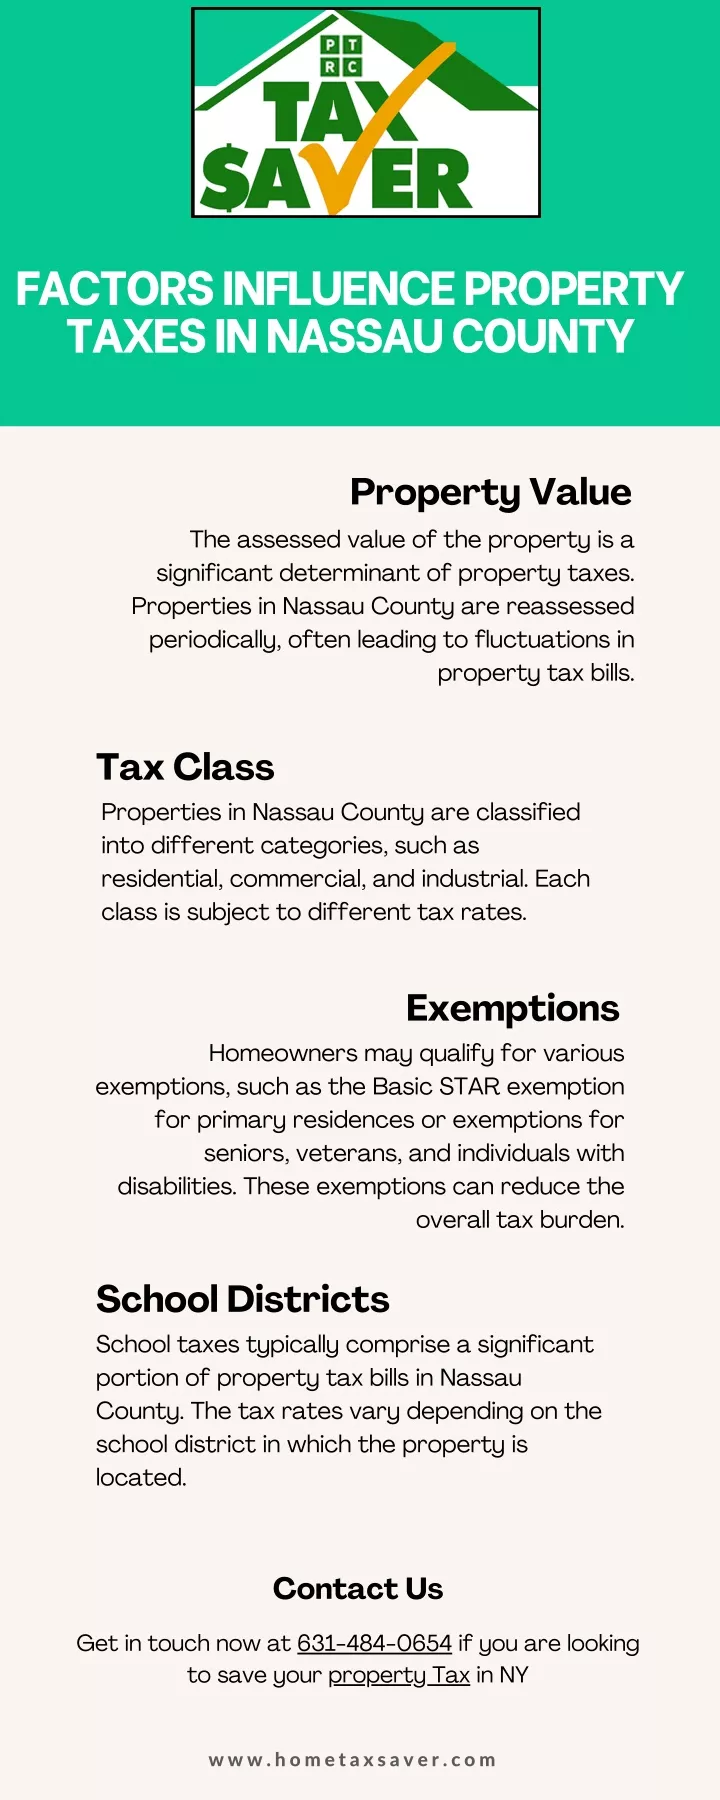 factors influence property taxes in nassau county